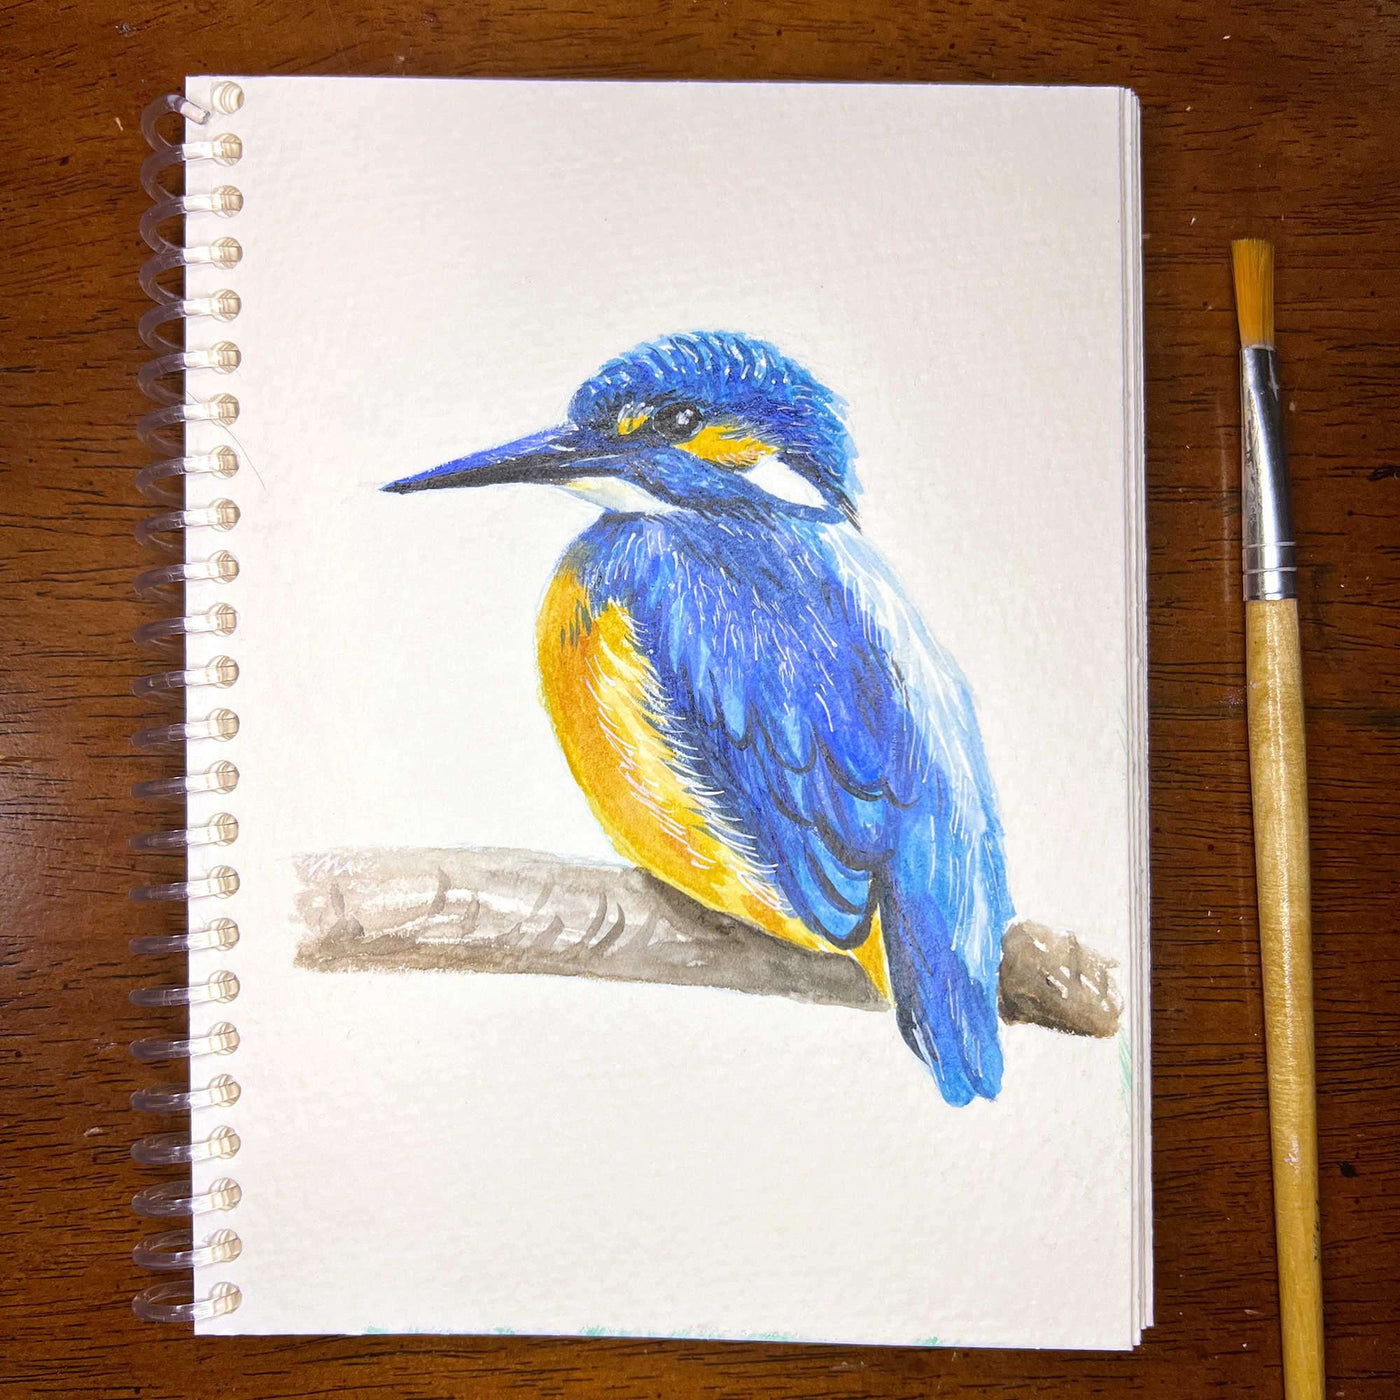 Watercolor sketch of a blue kingfisher on a spiral notebook.